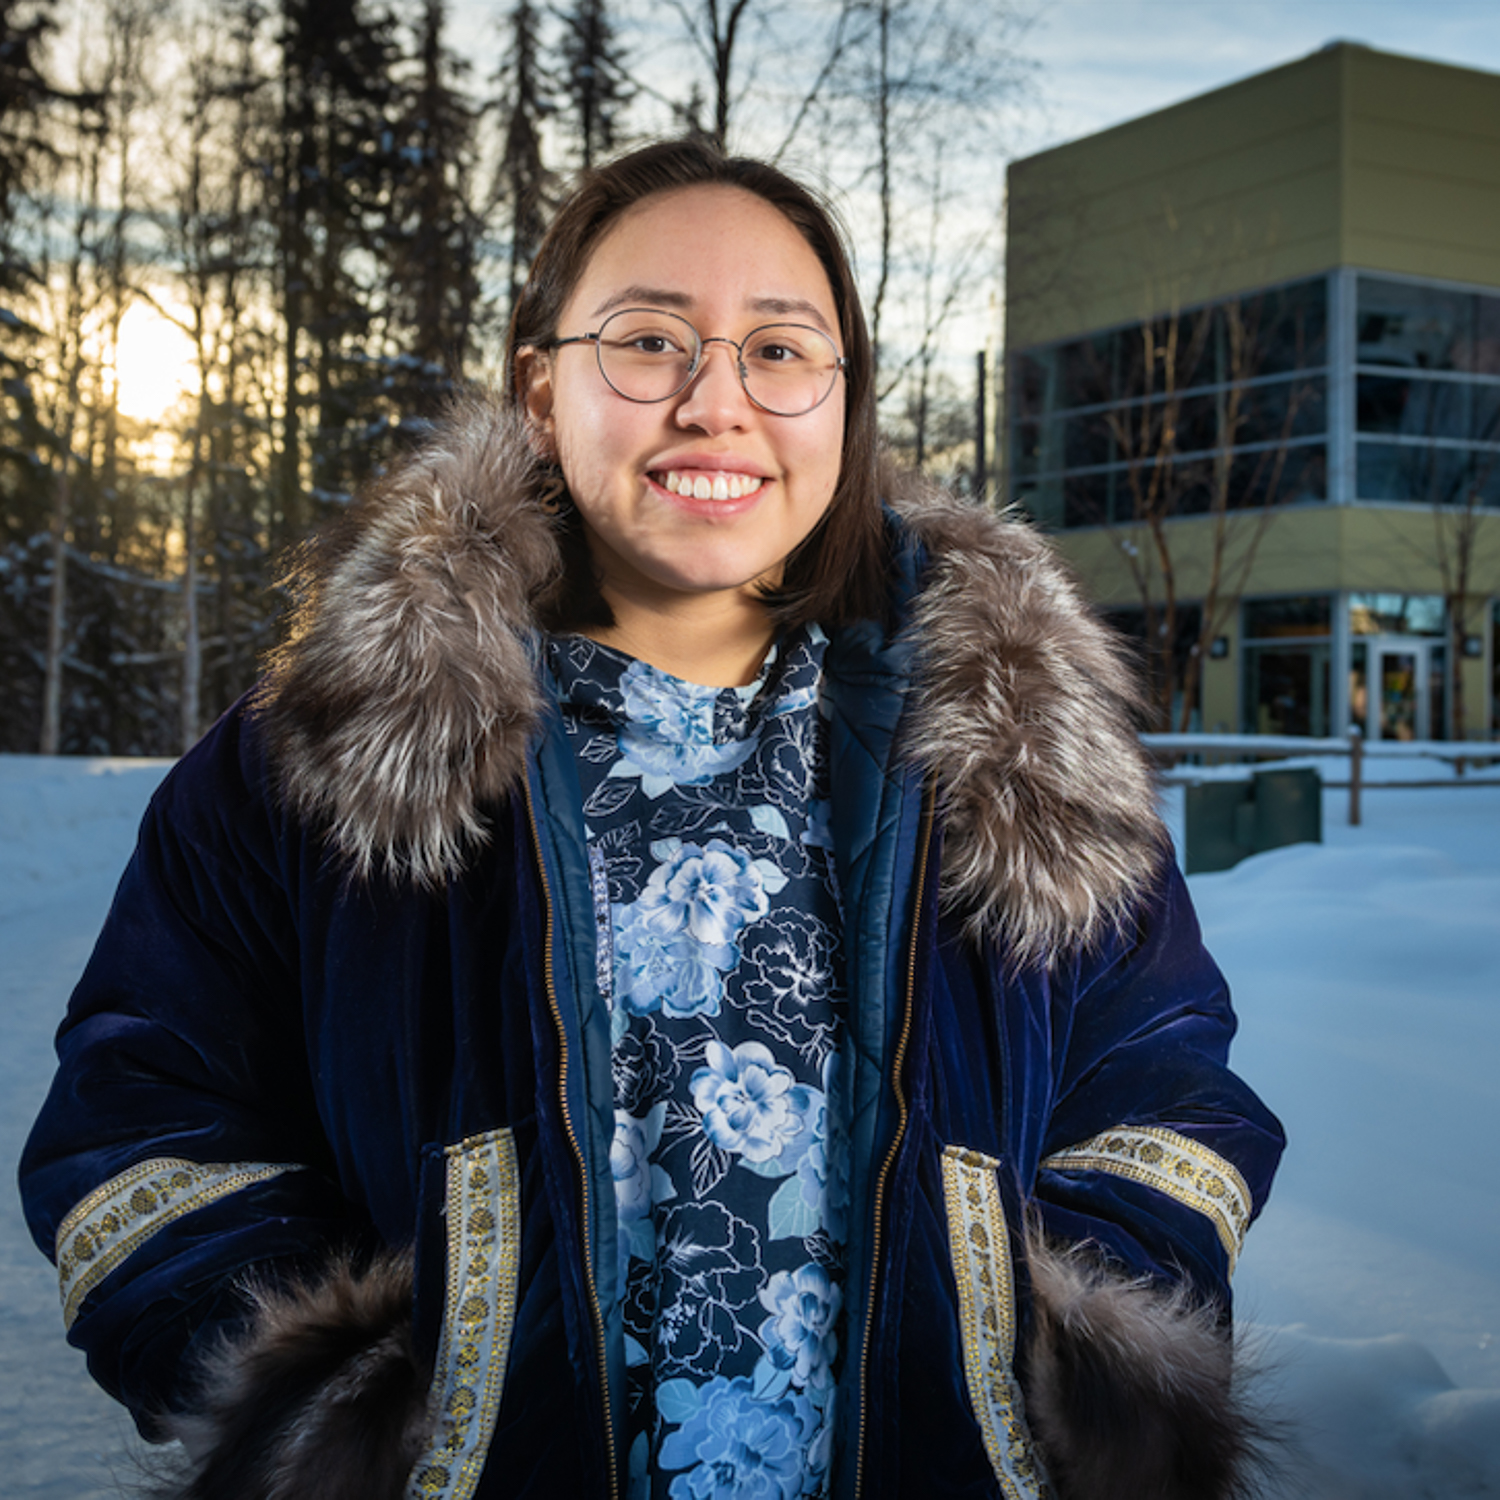 Student, Katherine Sakeagak, stands in front of the ANSEP building covered in snow.